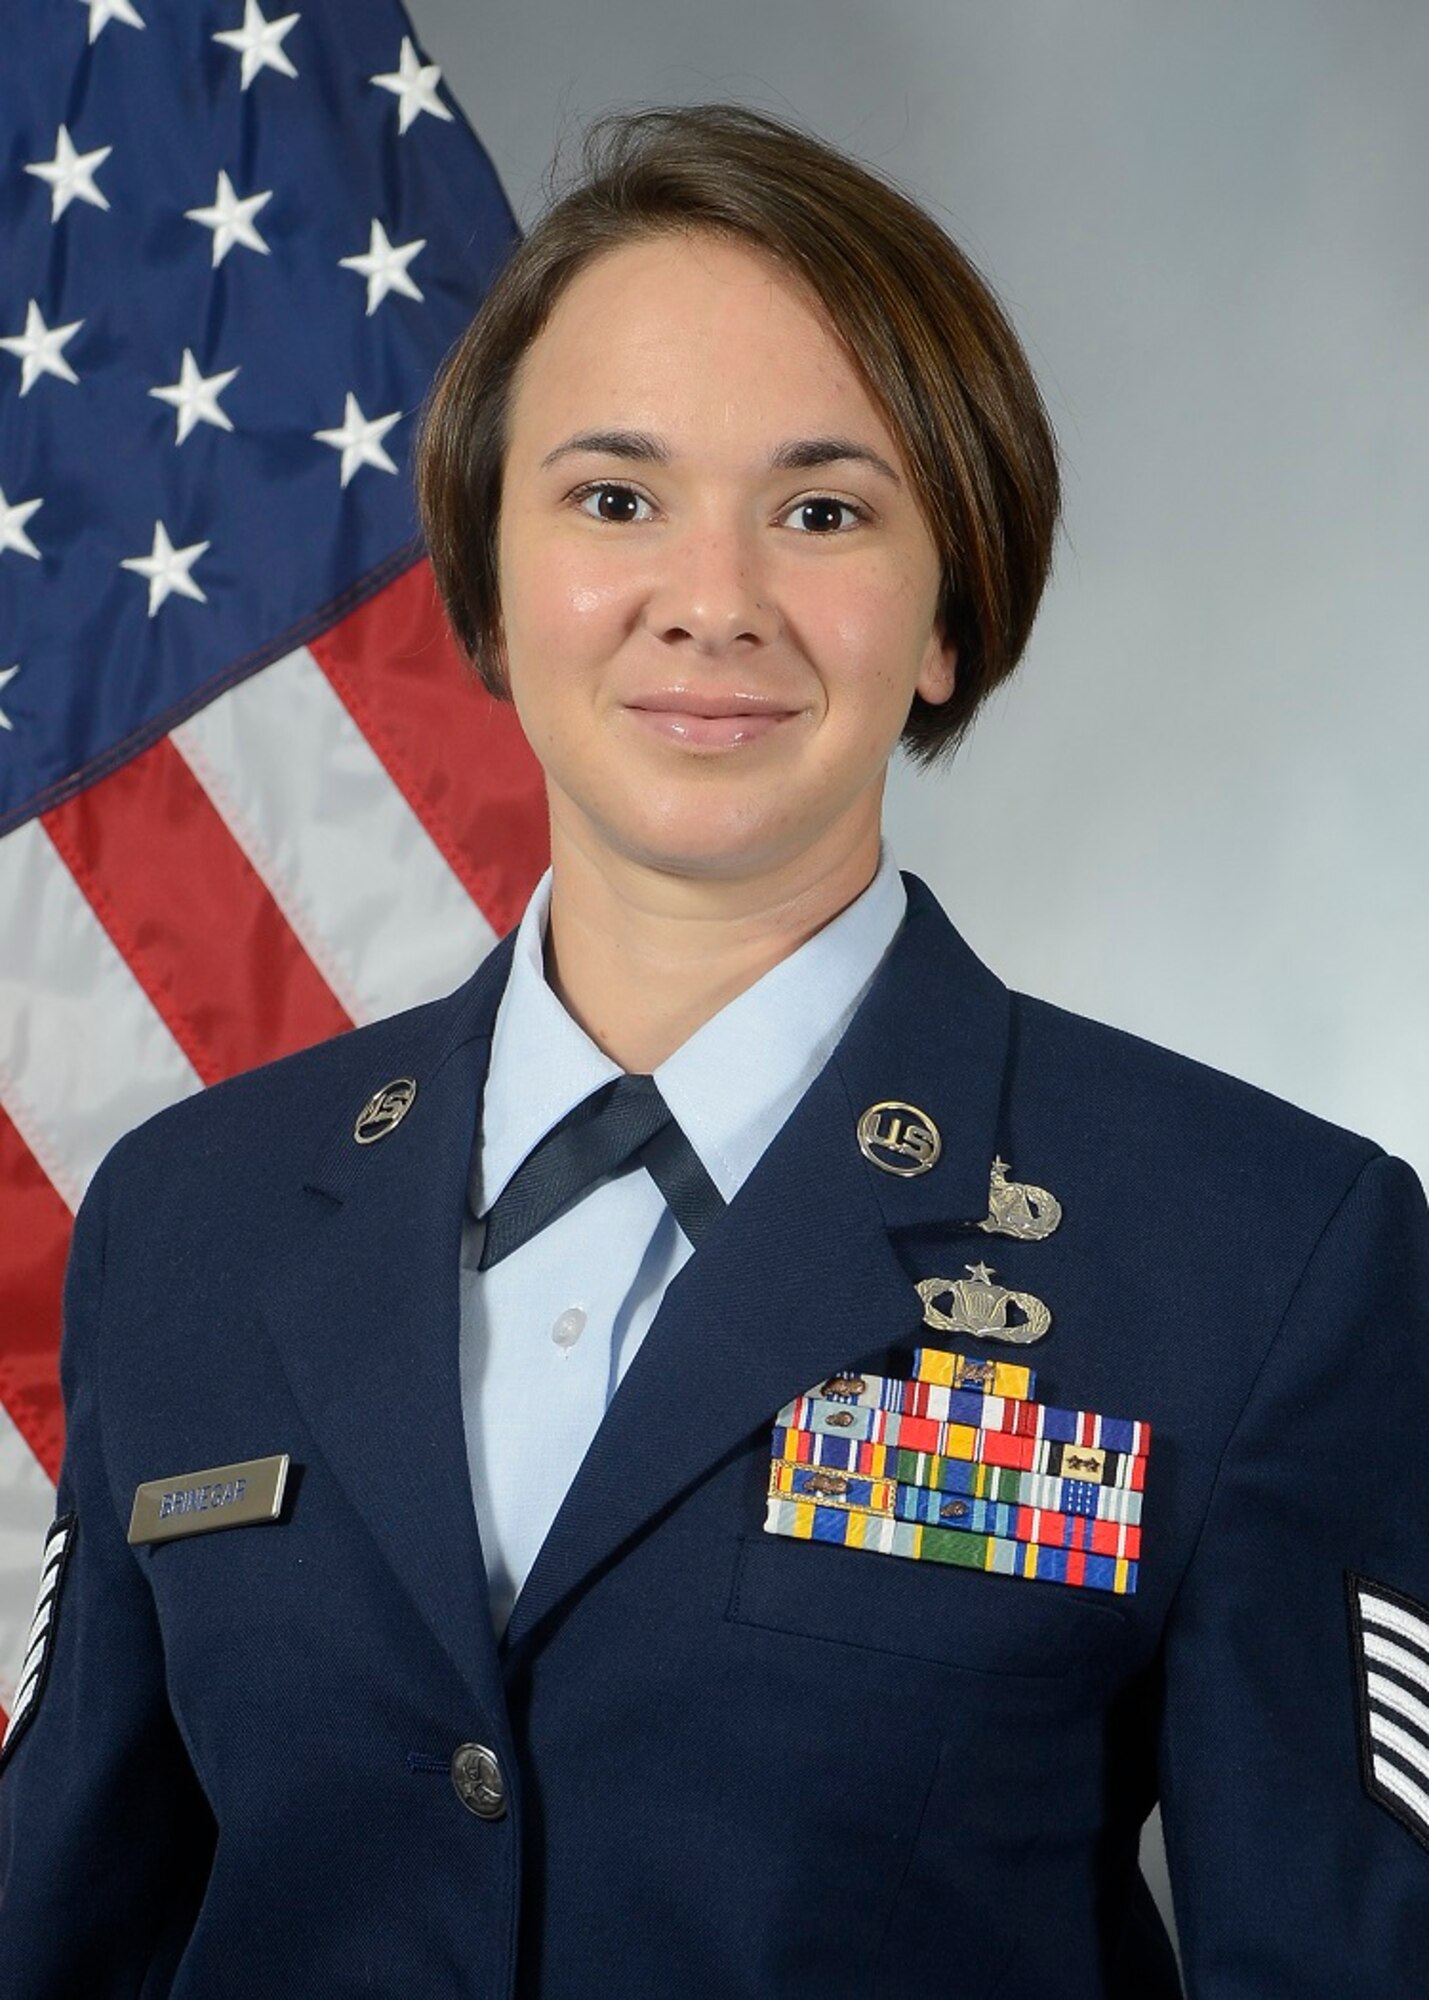 The 2016 Air Mobility Command Senior Leader Enlisted Commissioning Program selectee is Tech. Sgt. Rachel Brinegar, NCO in charge of general law assigned to the 6th Air Mobility Wing Legal Office. Brinegar will attend University of South Florida in August and begin Officer Training School after graduation. (U.S. Air Force photo)